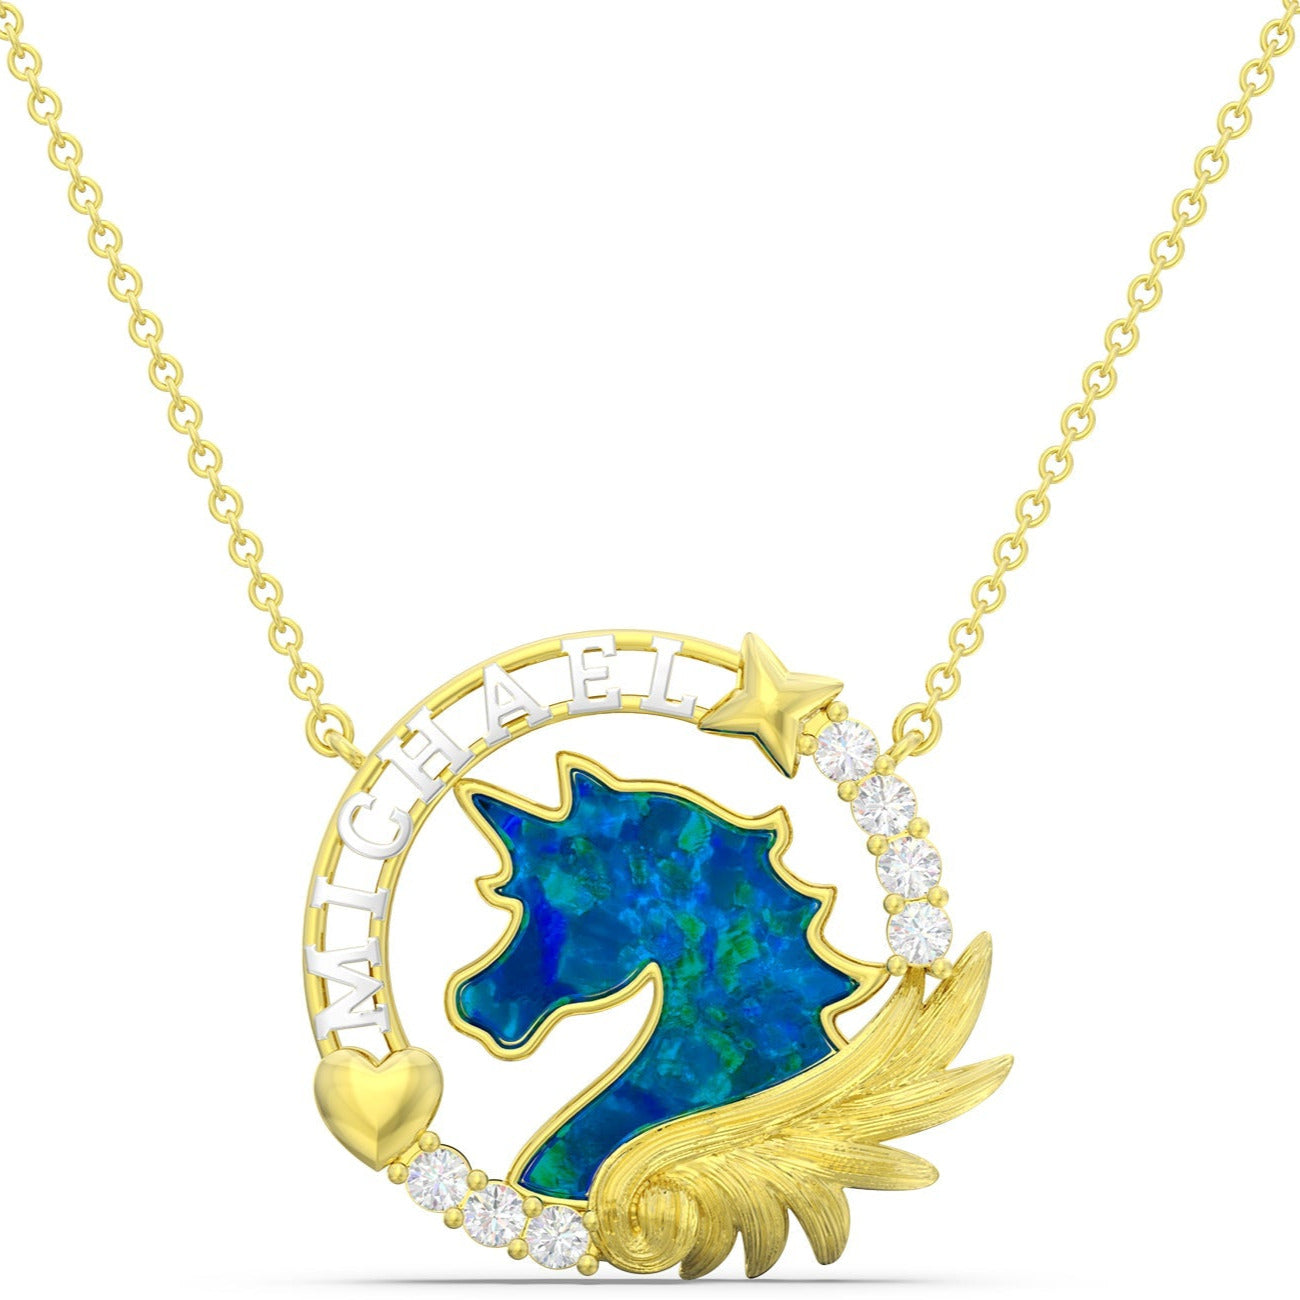 ThinkEngraved engraved necklace 14k gold over sterling silver Personalized Blue opal Unicorn Gold Necklace With 3d Name Cut Out